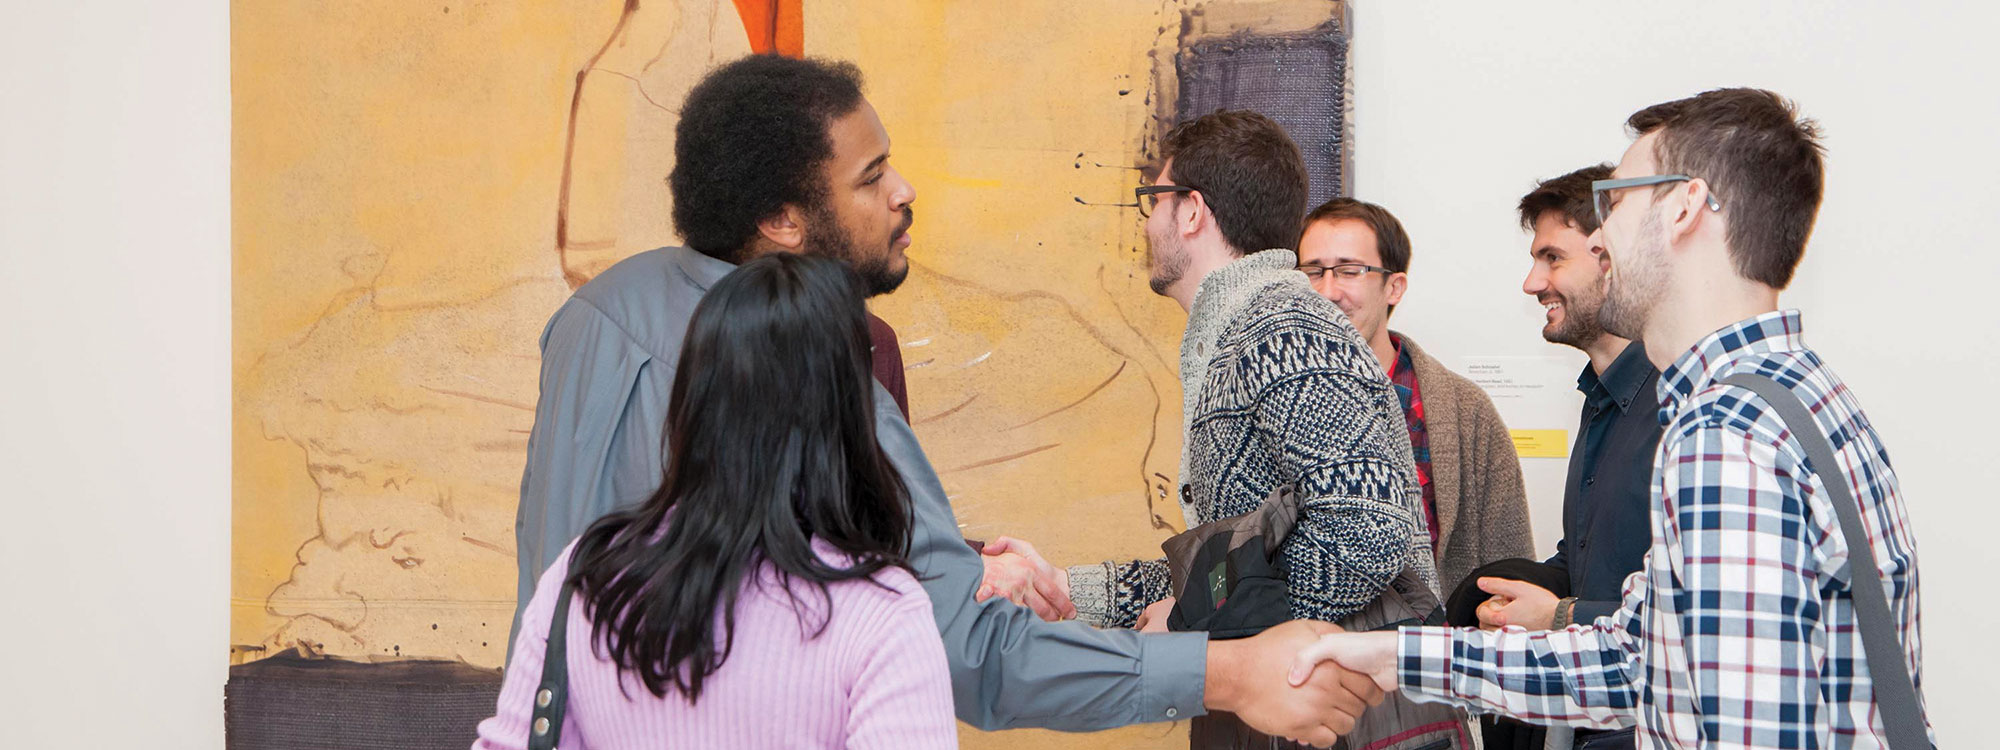 A group of museum-goers greeting each other in front of a large painting in the gallery.